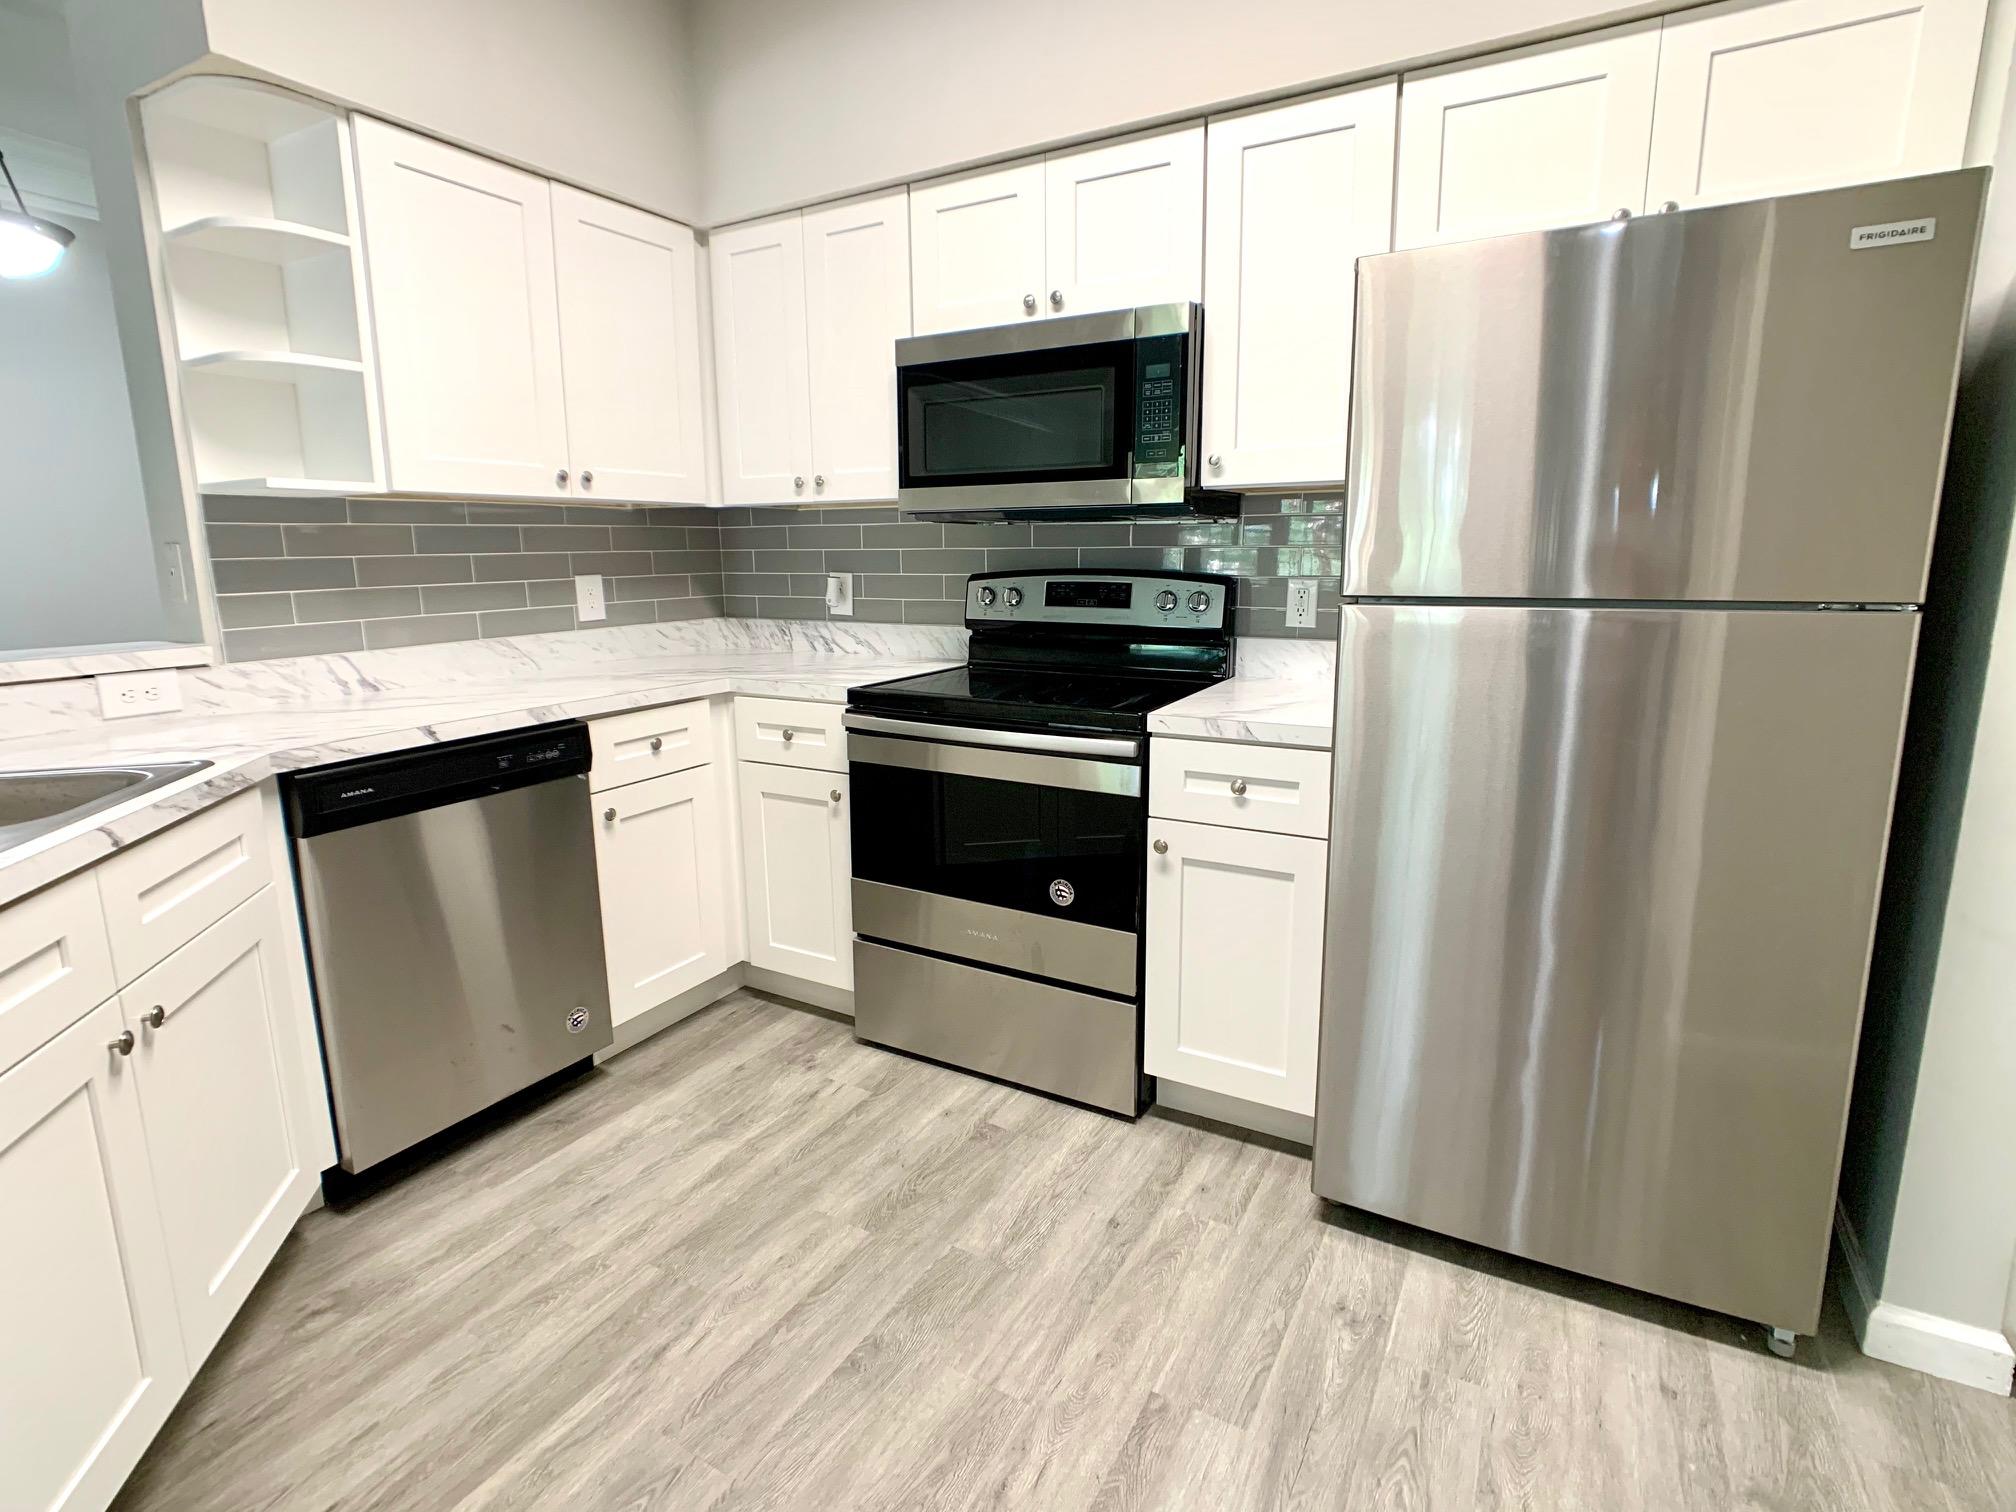 a kitchen with white cabinets stainless steel appliances and wooden floor